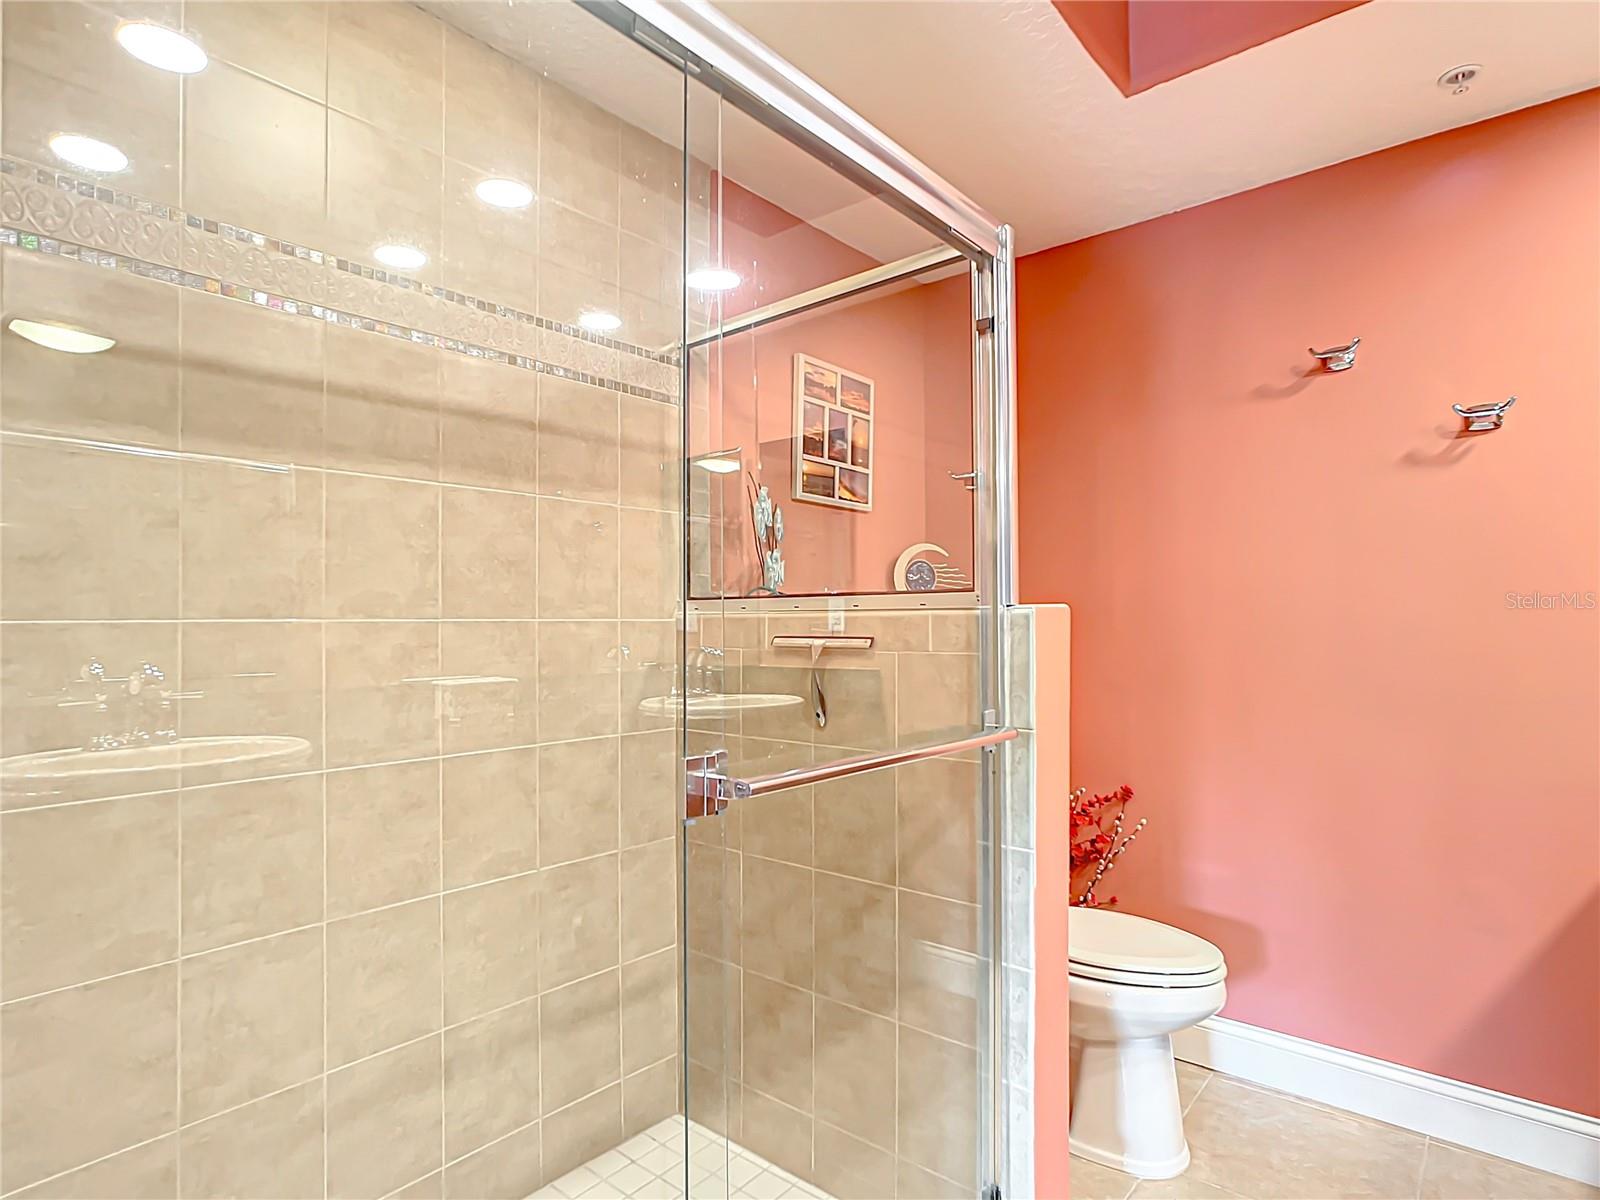 This is a closer look at how nice and spacious this 2nd bathroom shower is.